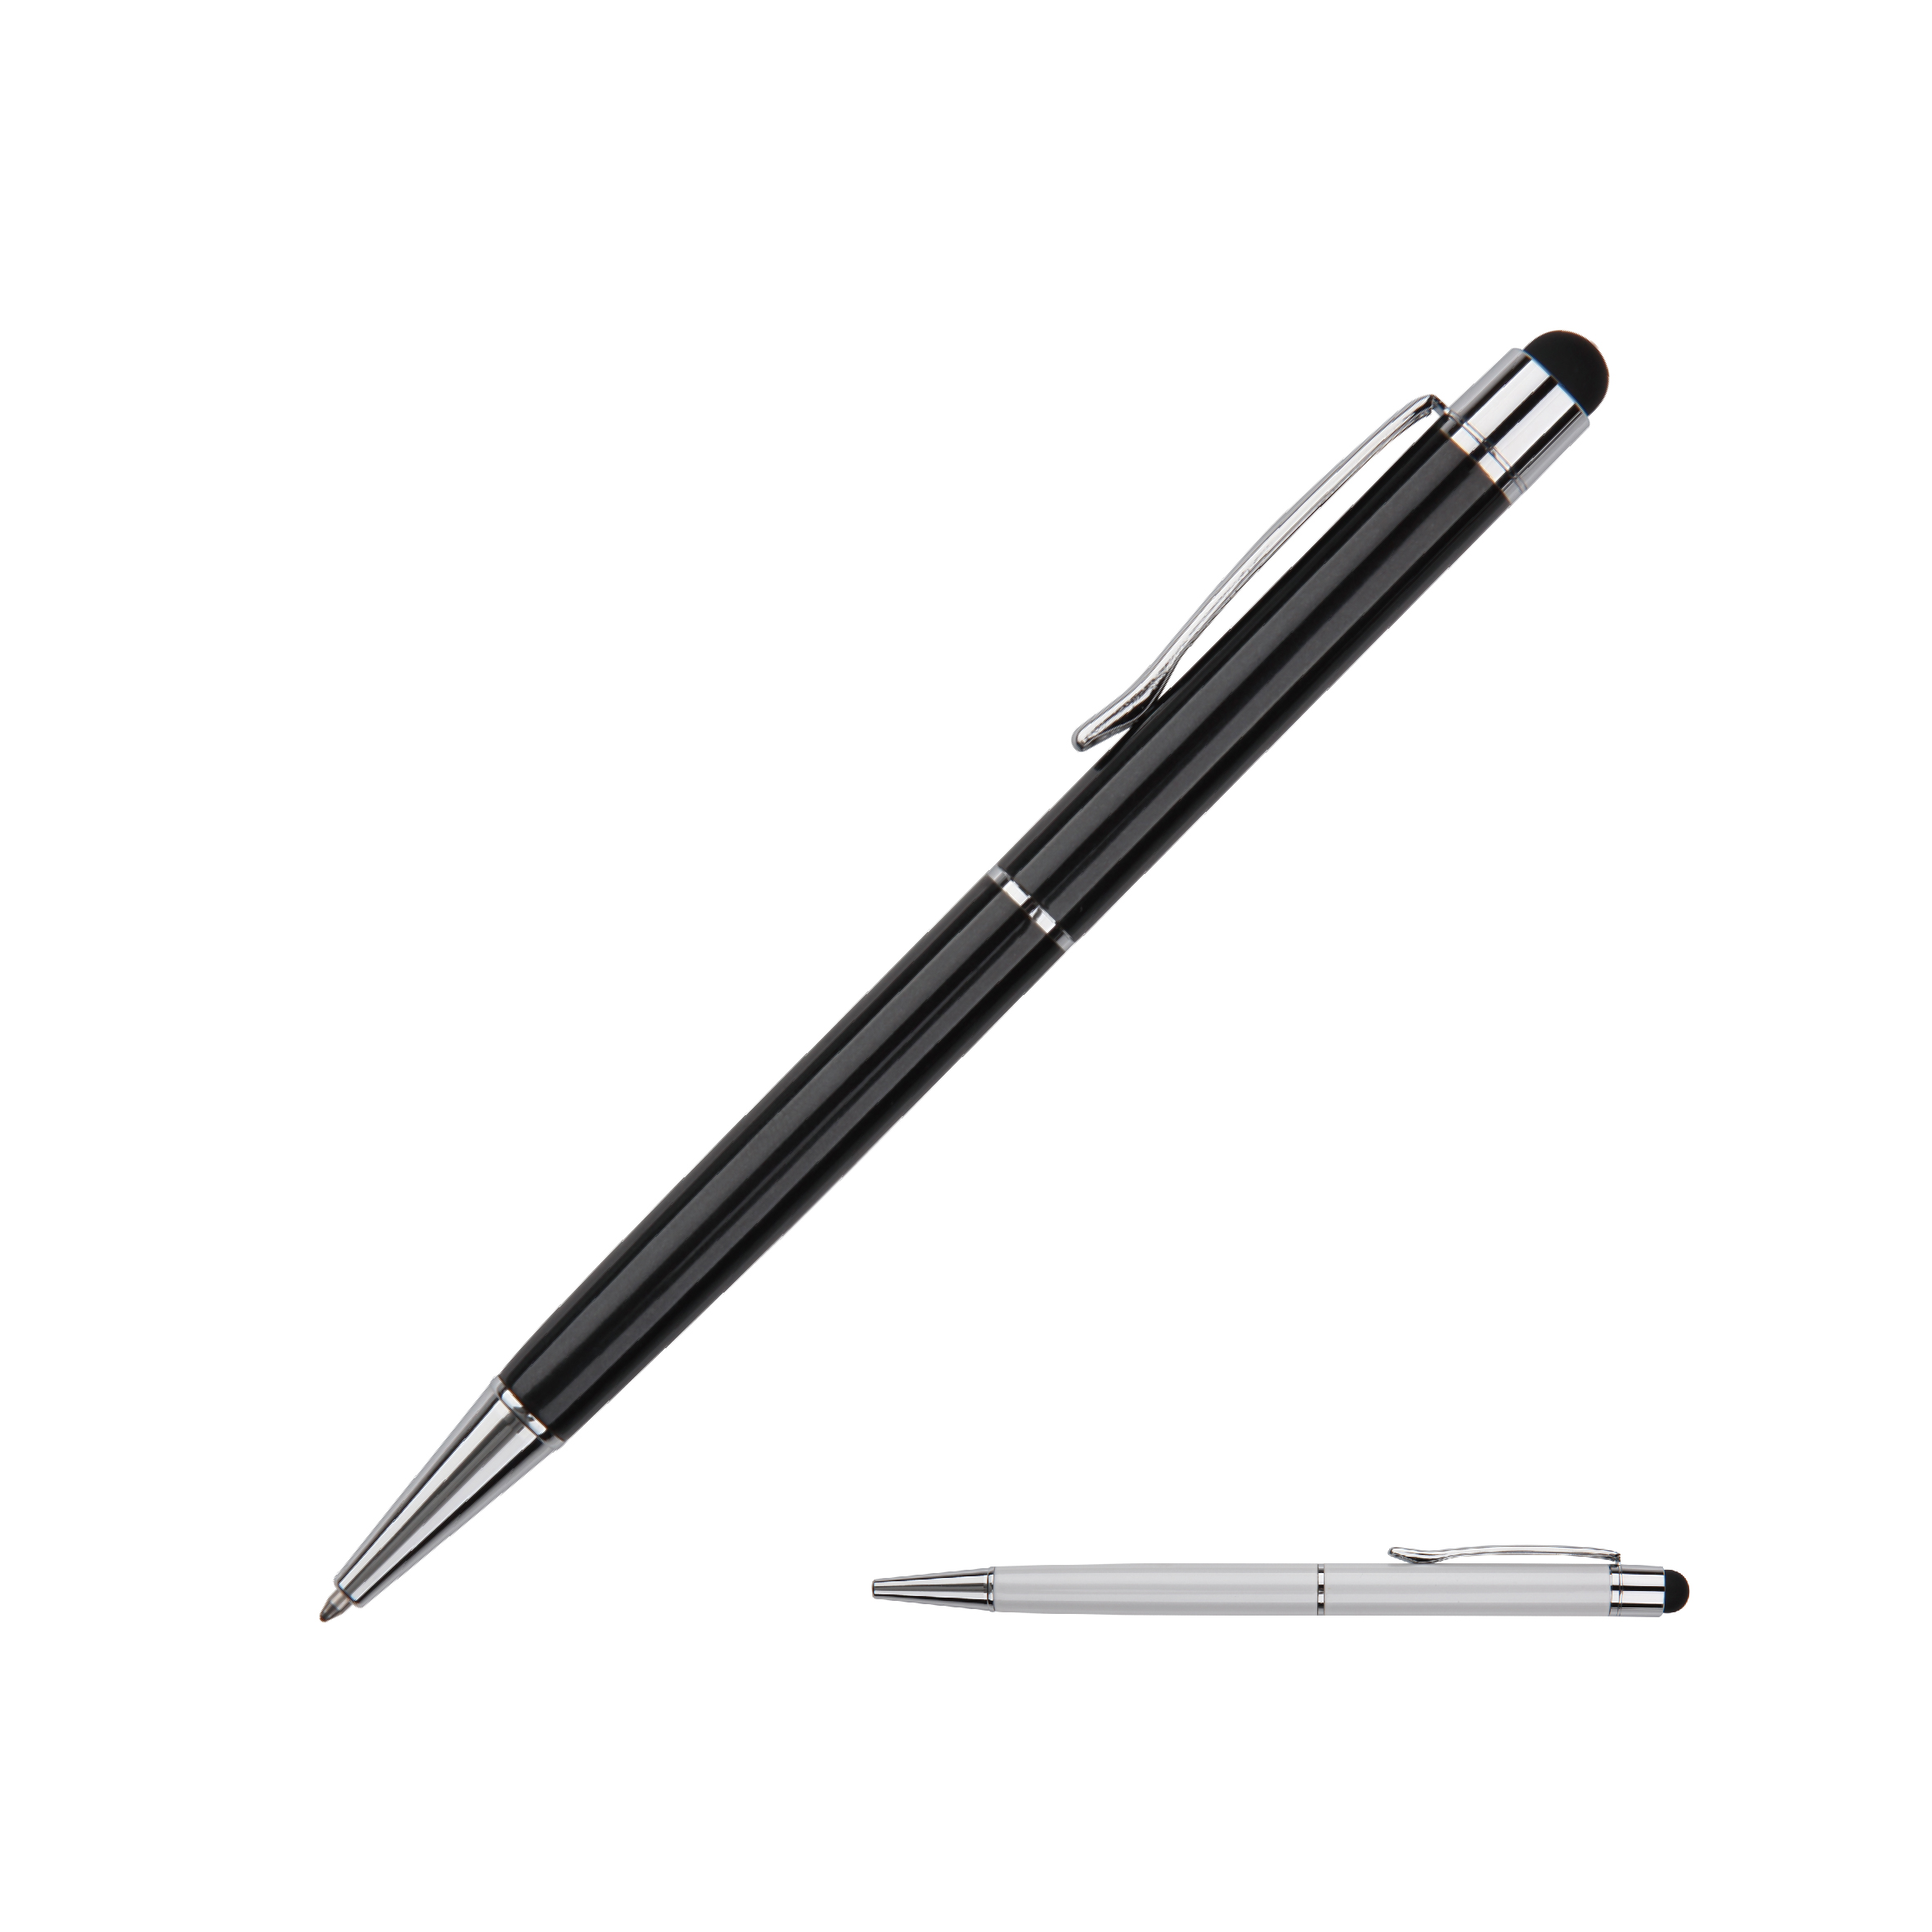 0.7&1.0mm Twistable Black White Metal Ball Pen with Stylus